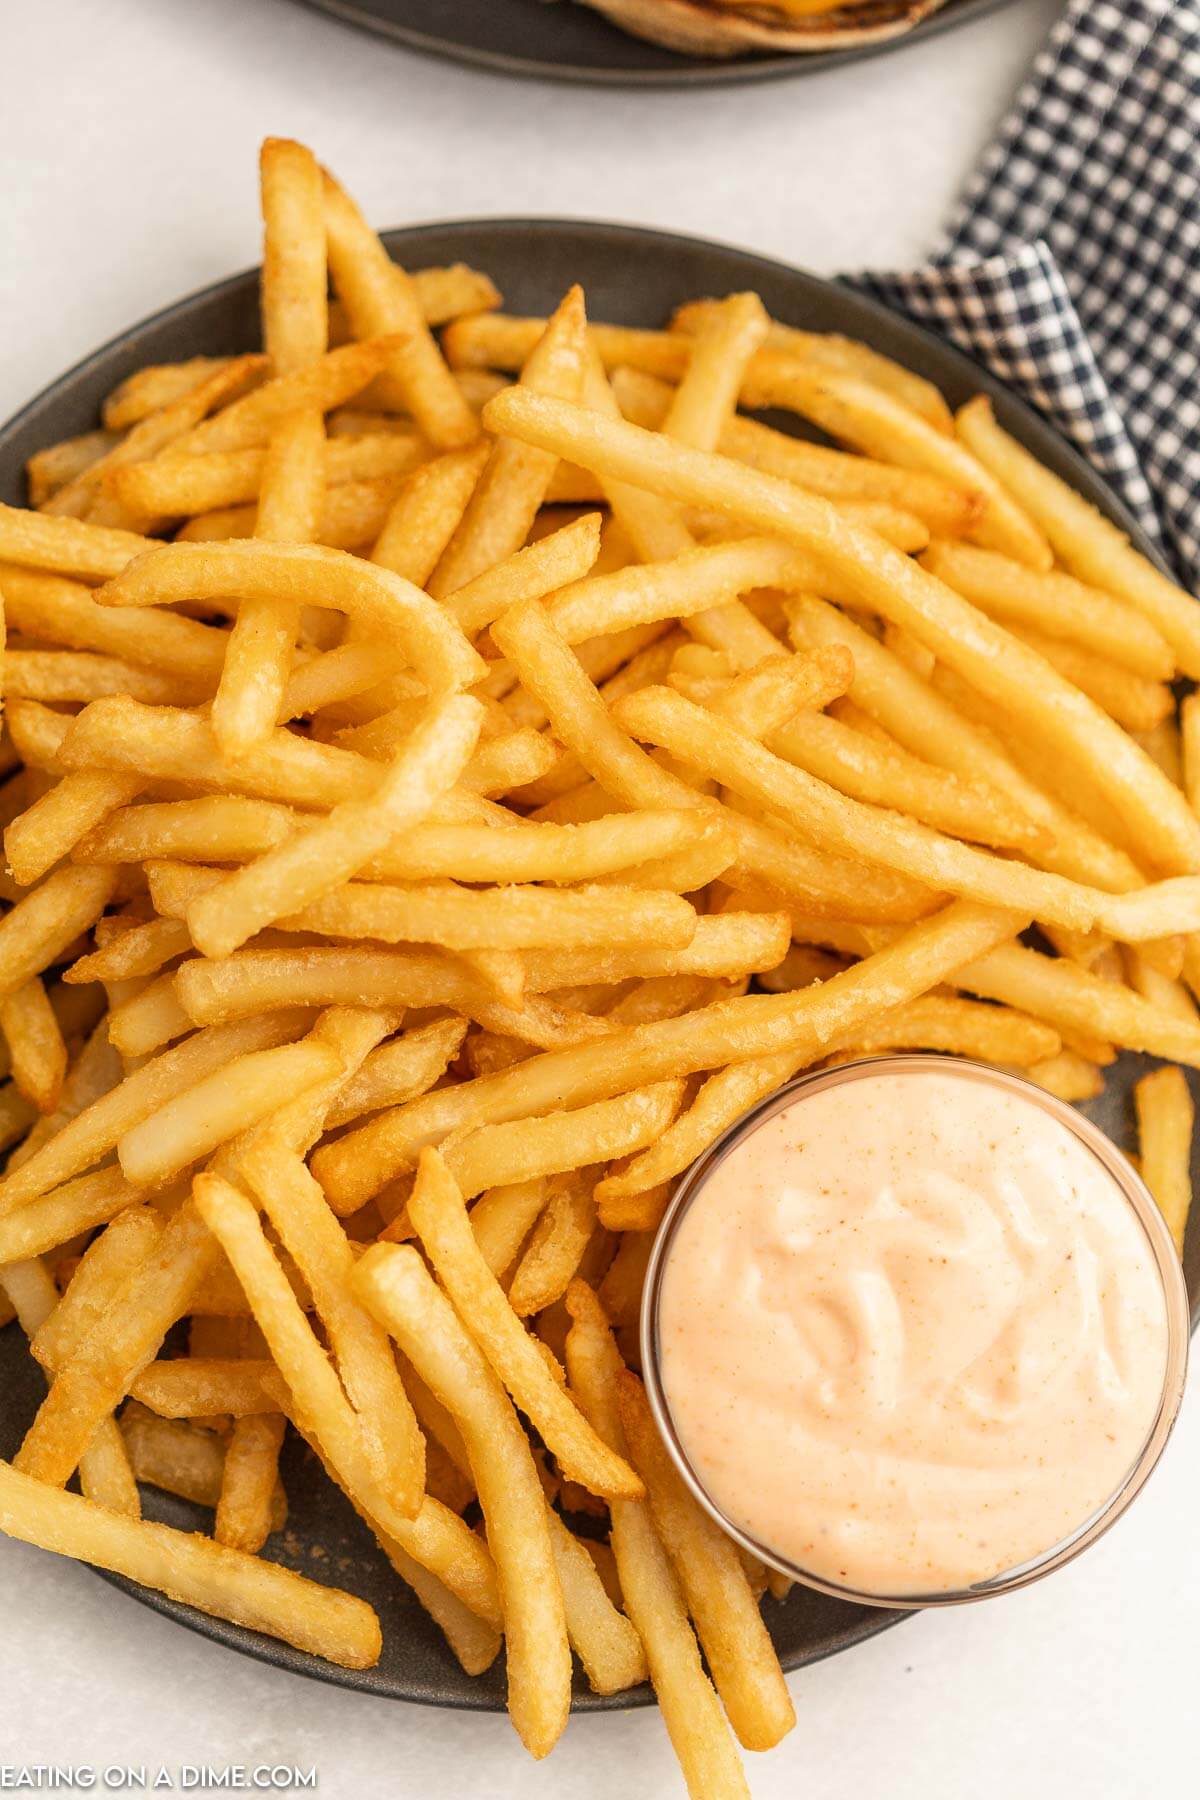 Plate of french fries with a side of sauce